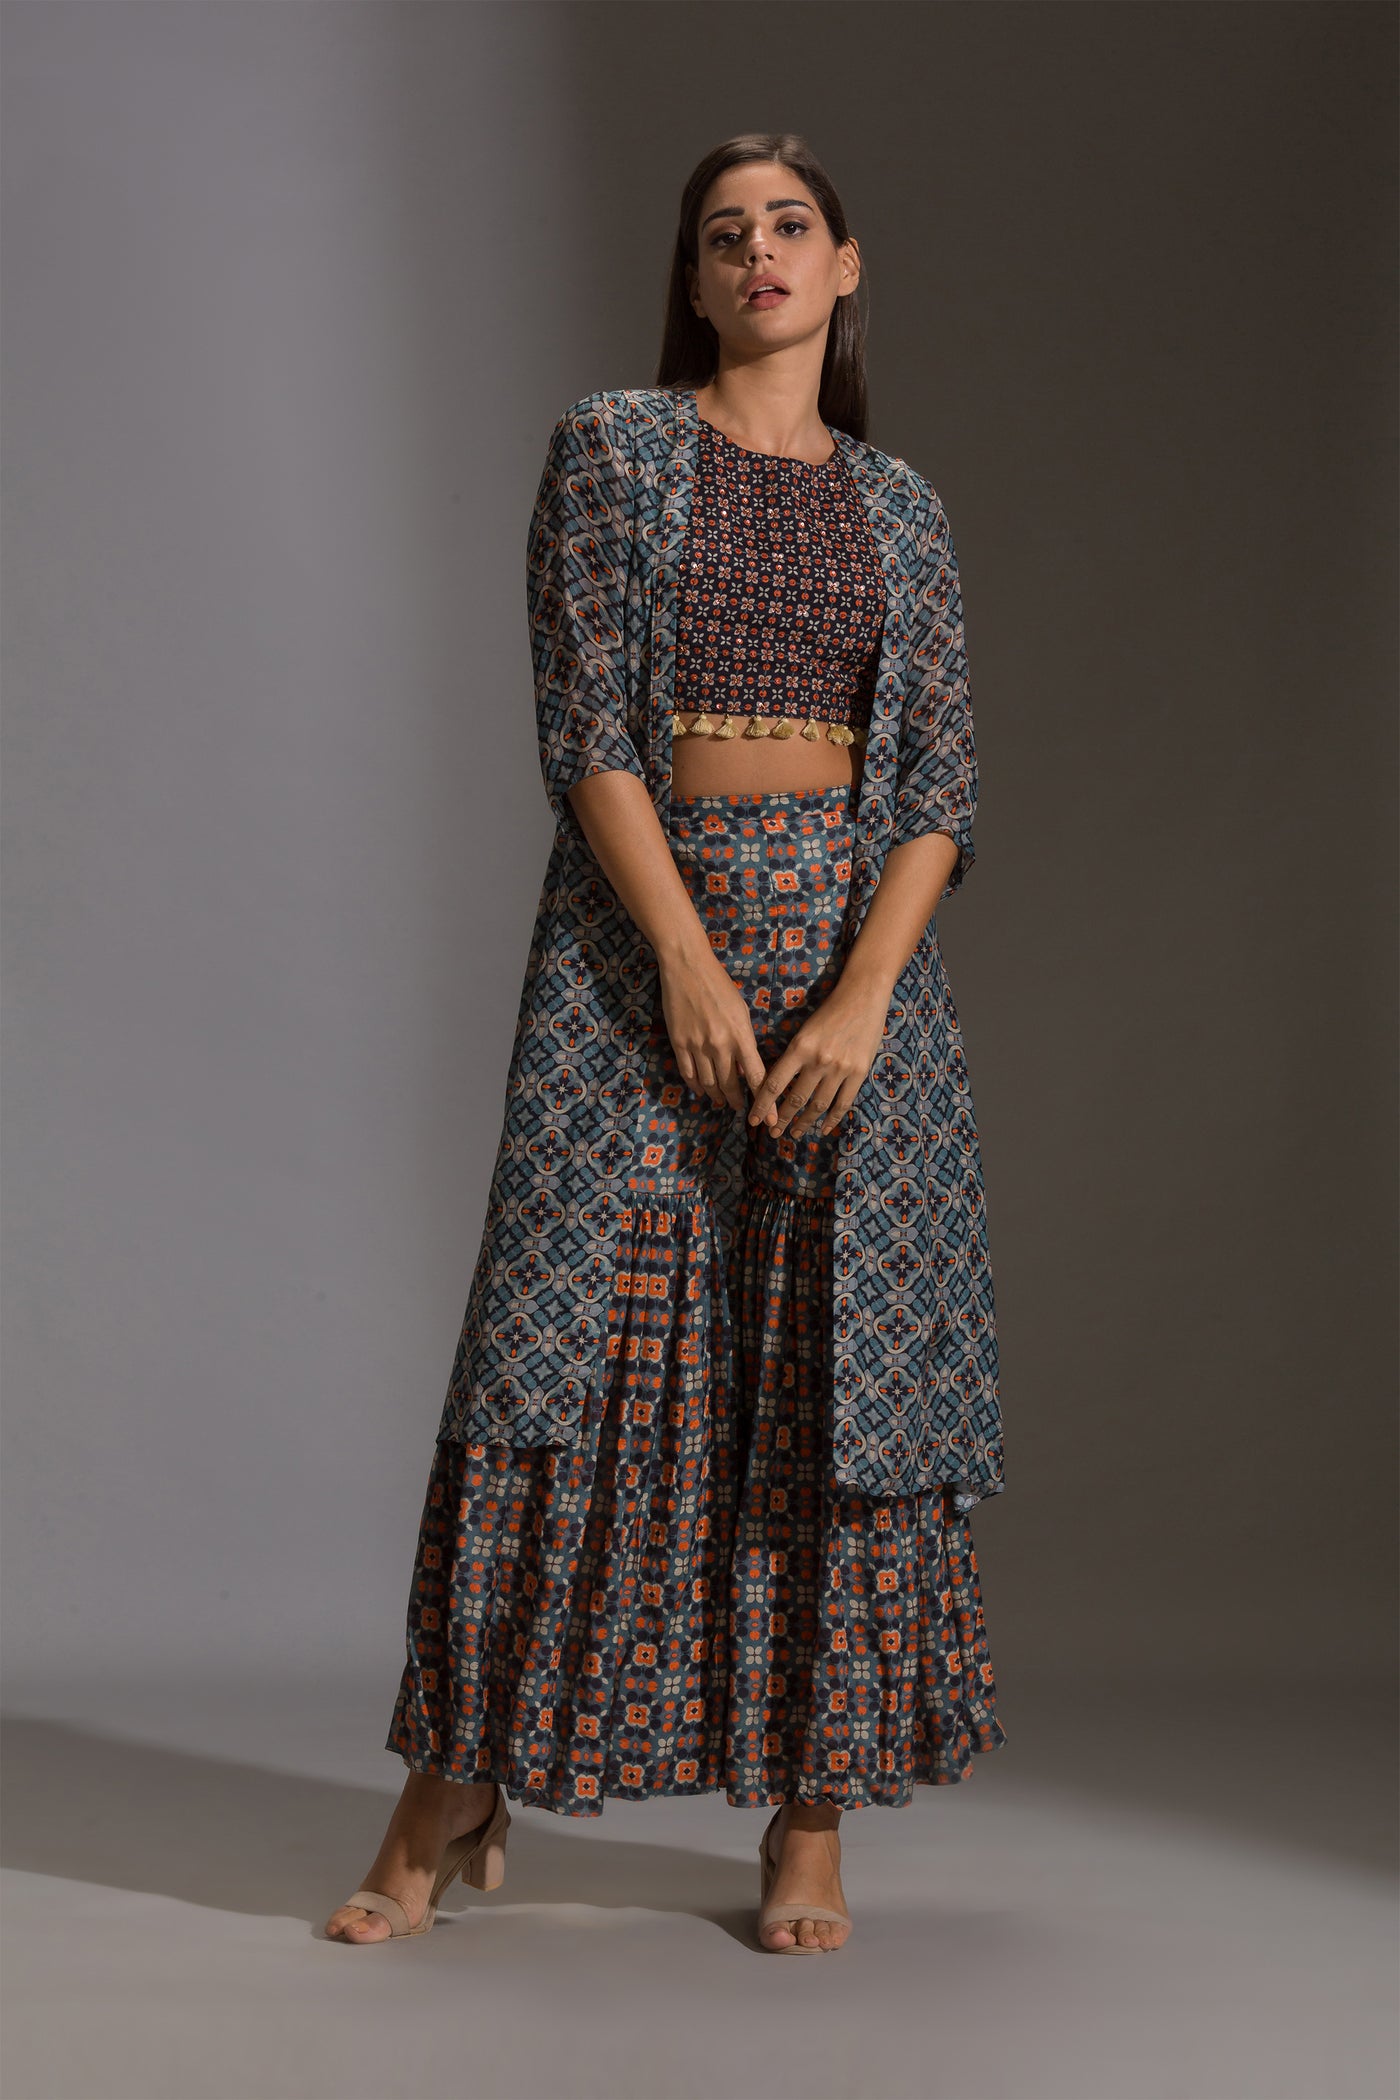 sougat paul Printed crop top with tassel detail paired with printed sharara and jacket blue fusion online shopping melange singapore indian designer wear